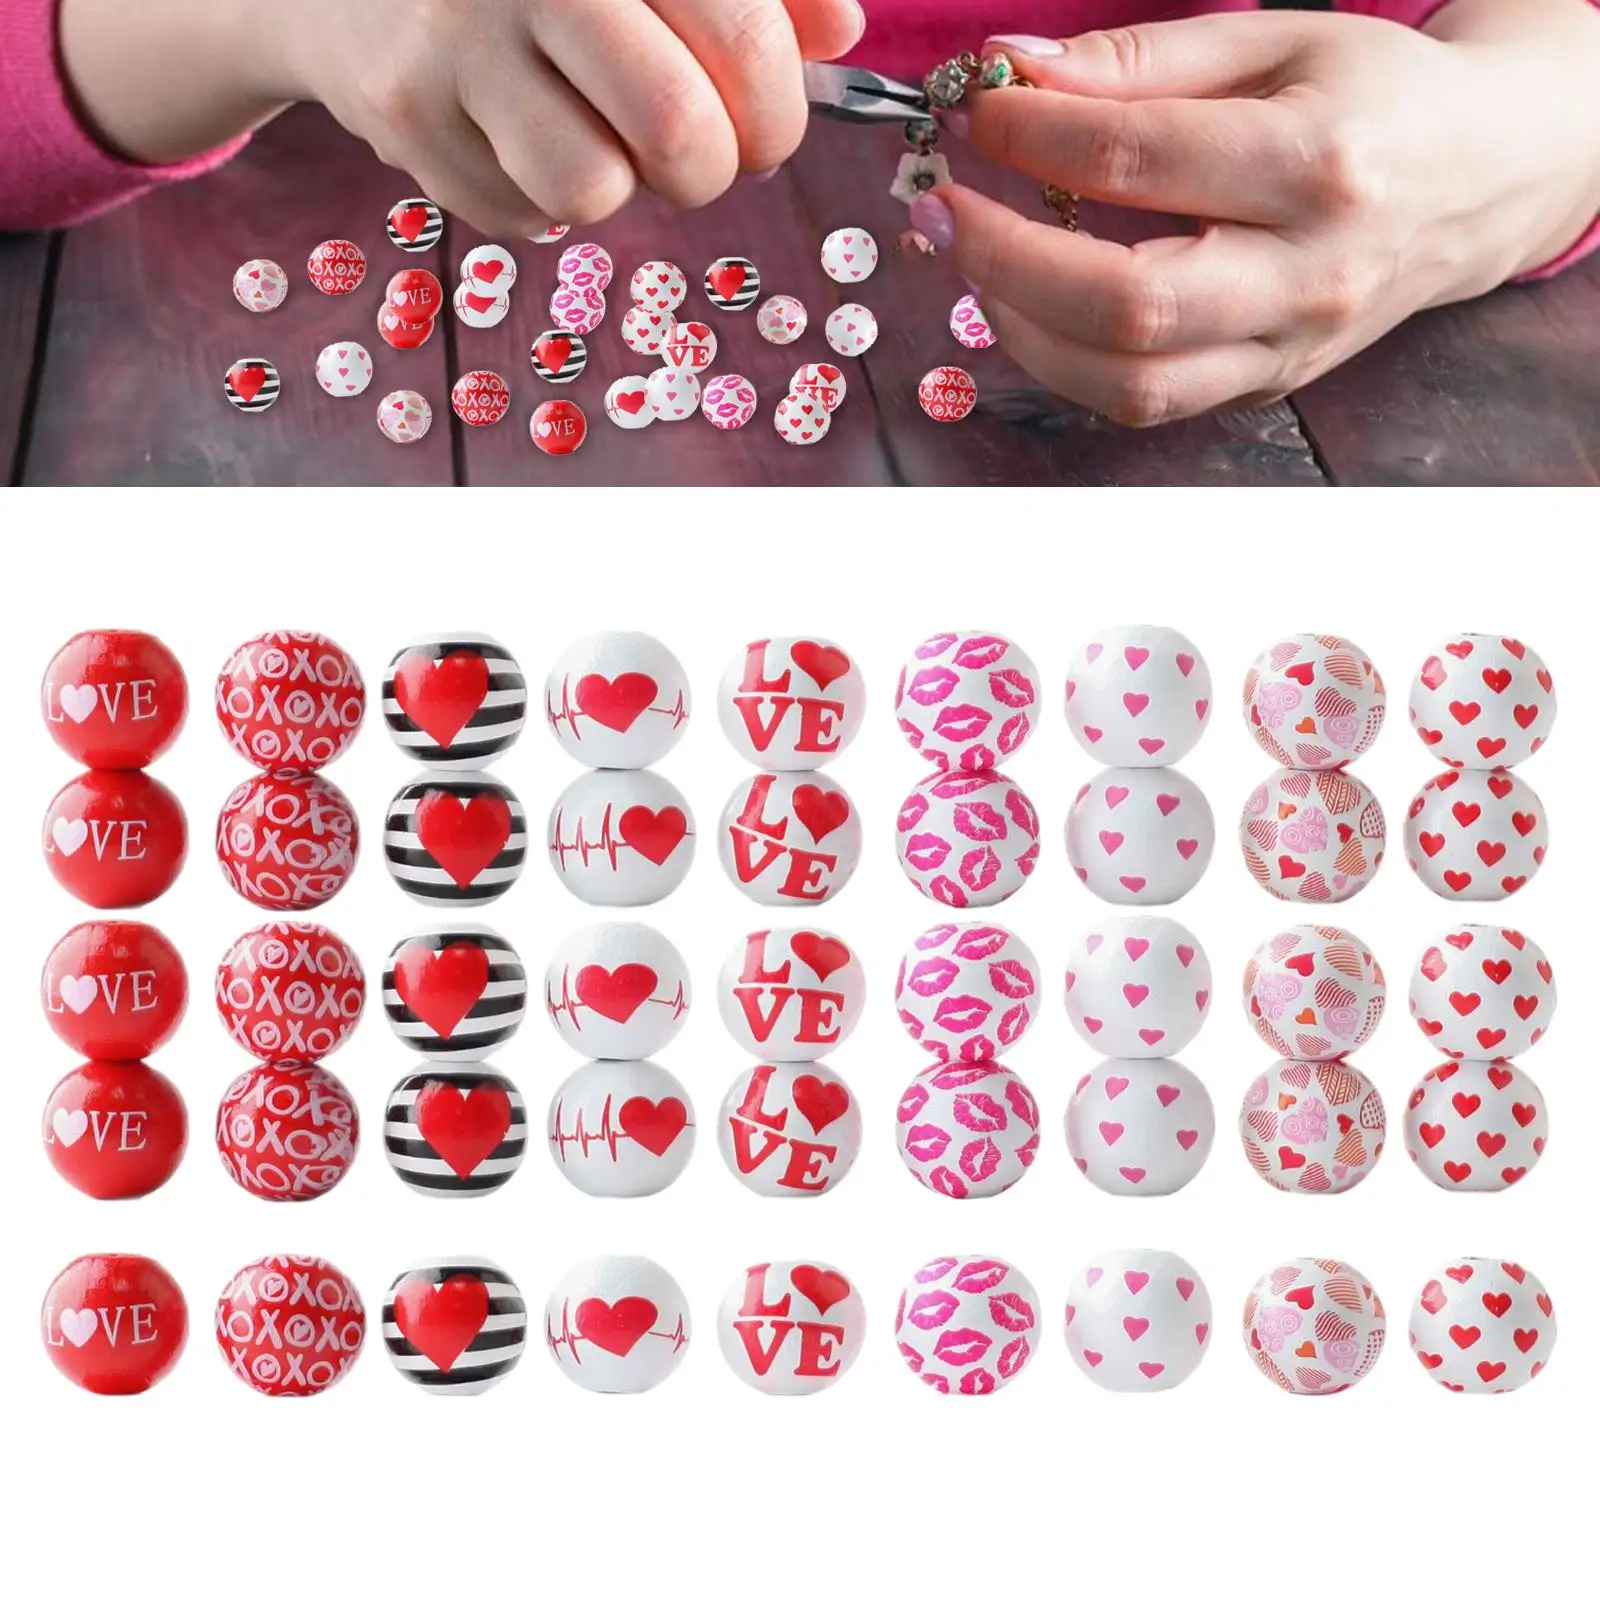 45Pcs Valentine`s Day Wooden Beads Decorative Crafts DIY Projects DIY Garland Boho 16mm for Wedding Home Party Gifts Ornament